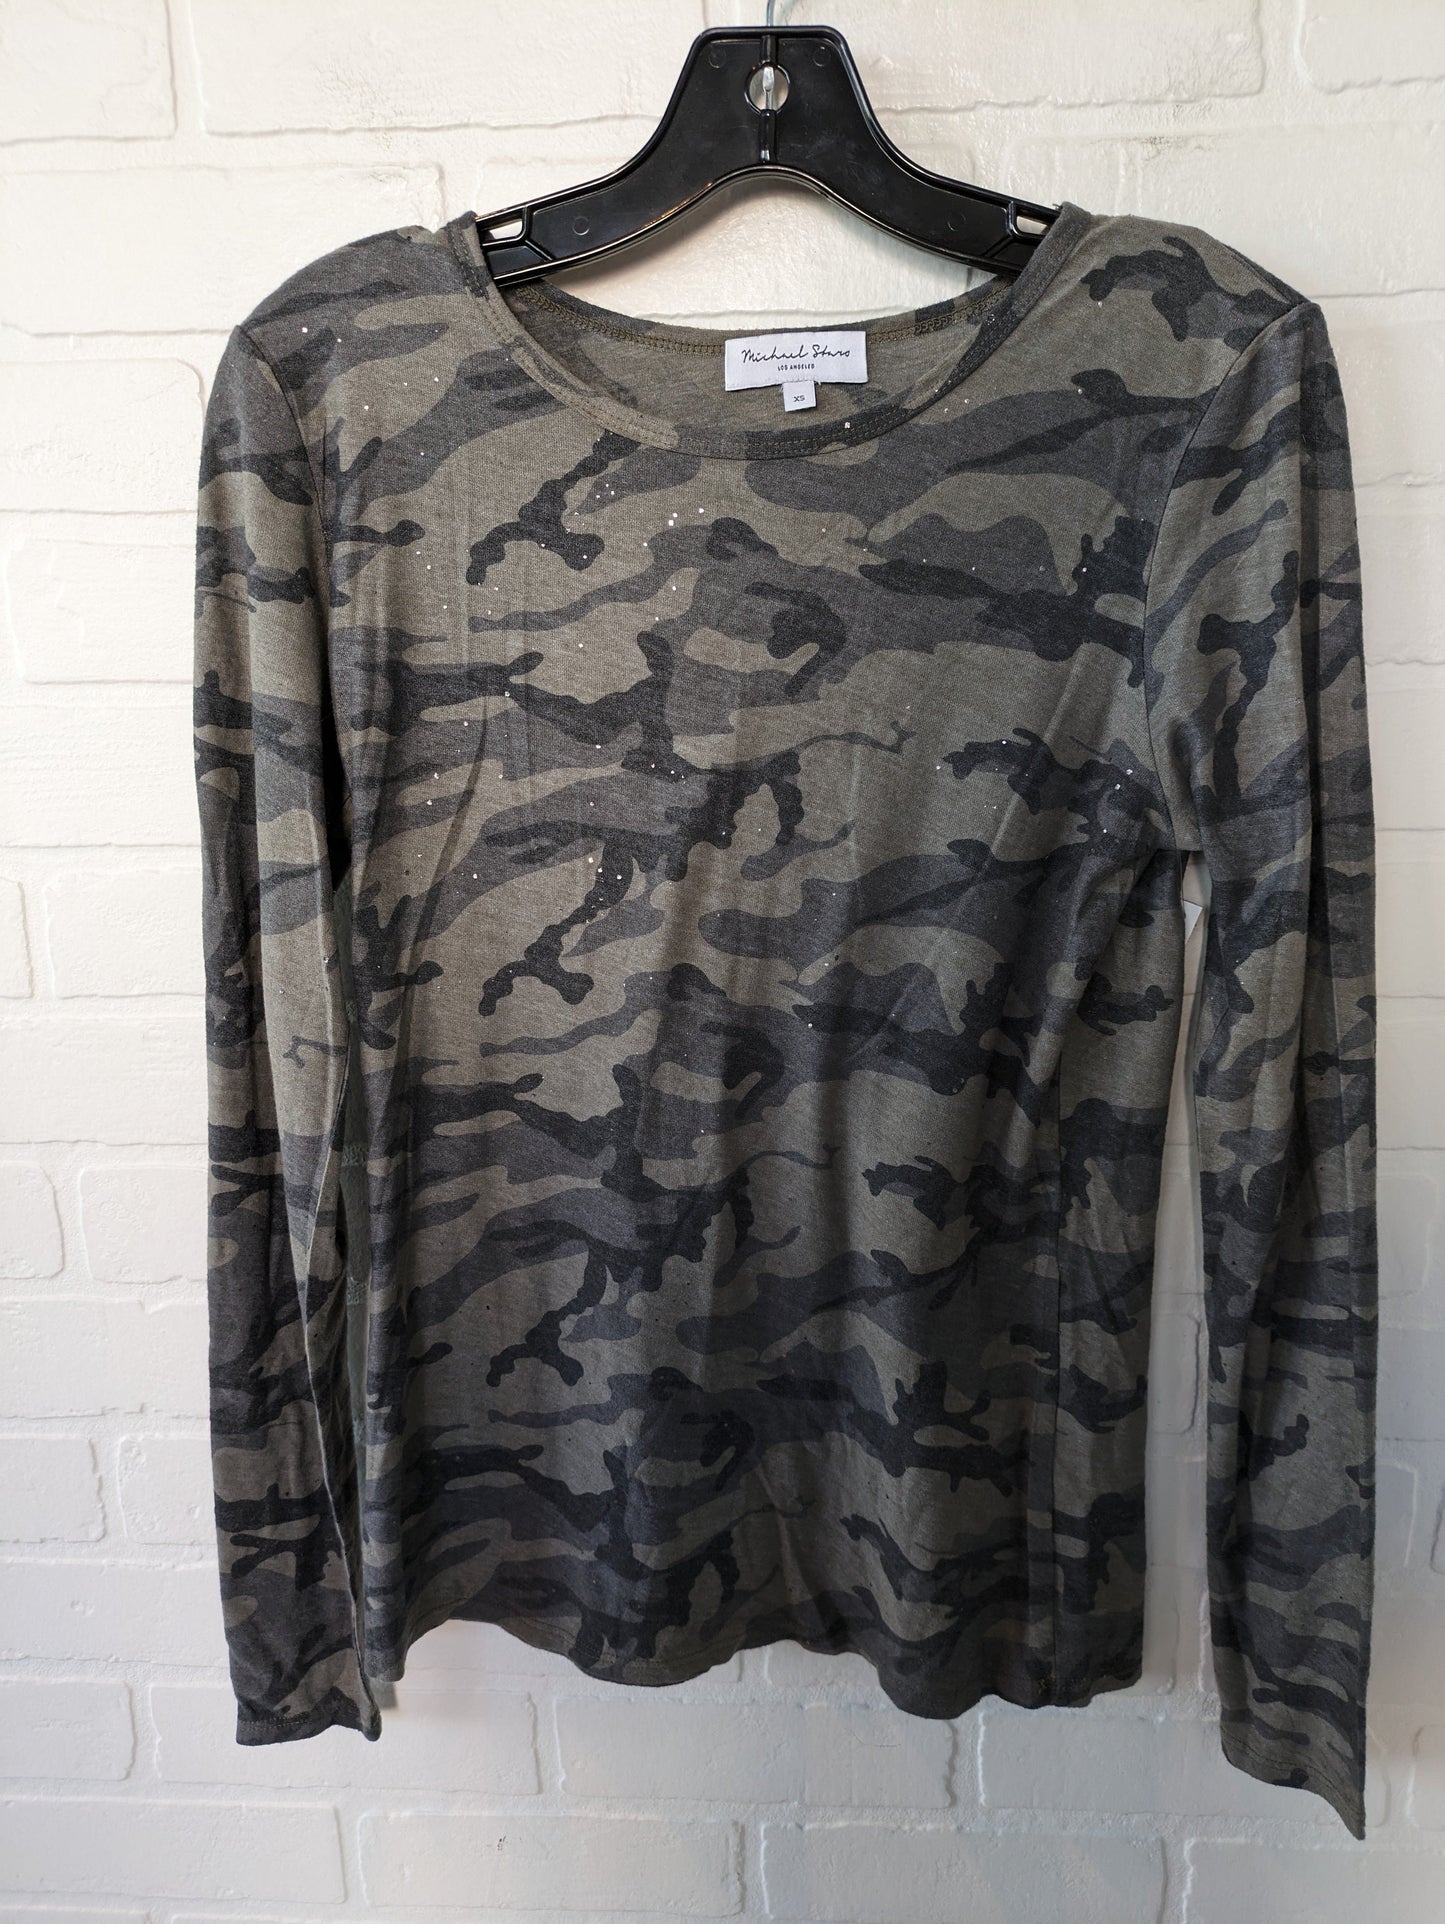 Camouflage Print Top Long Sleeve Michael Stars, Size Xs